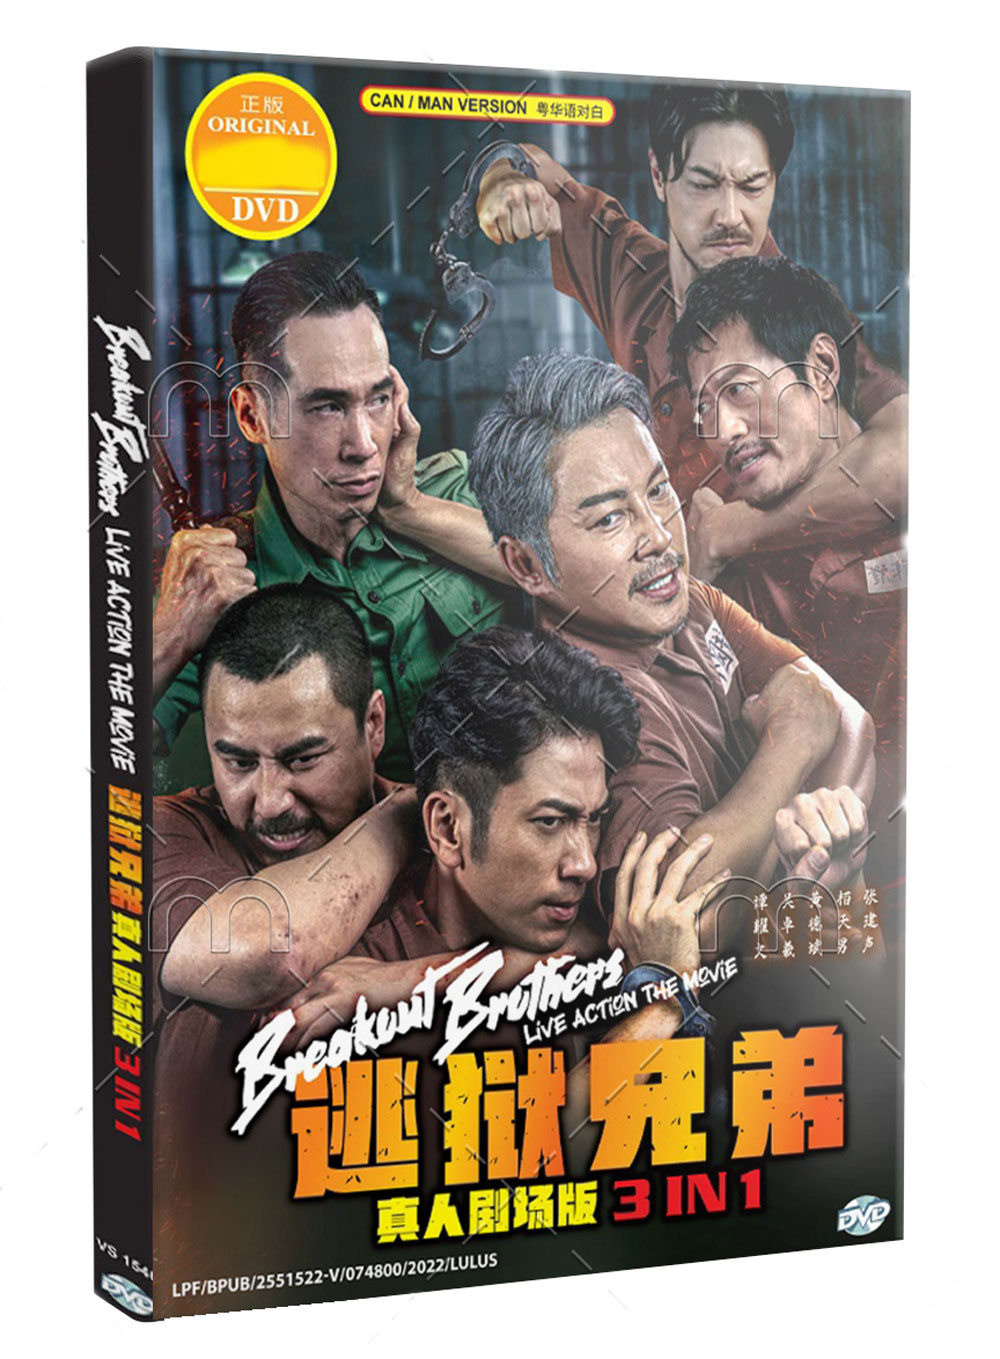 Breakout Brothers 3 In 1 (DVD) (2020) Hong Kong Movie